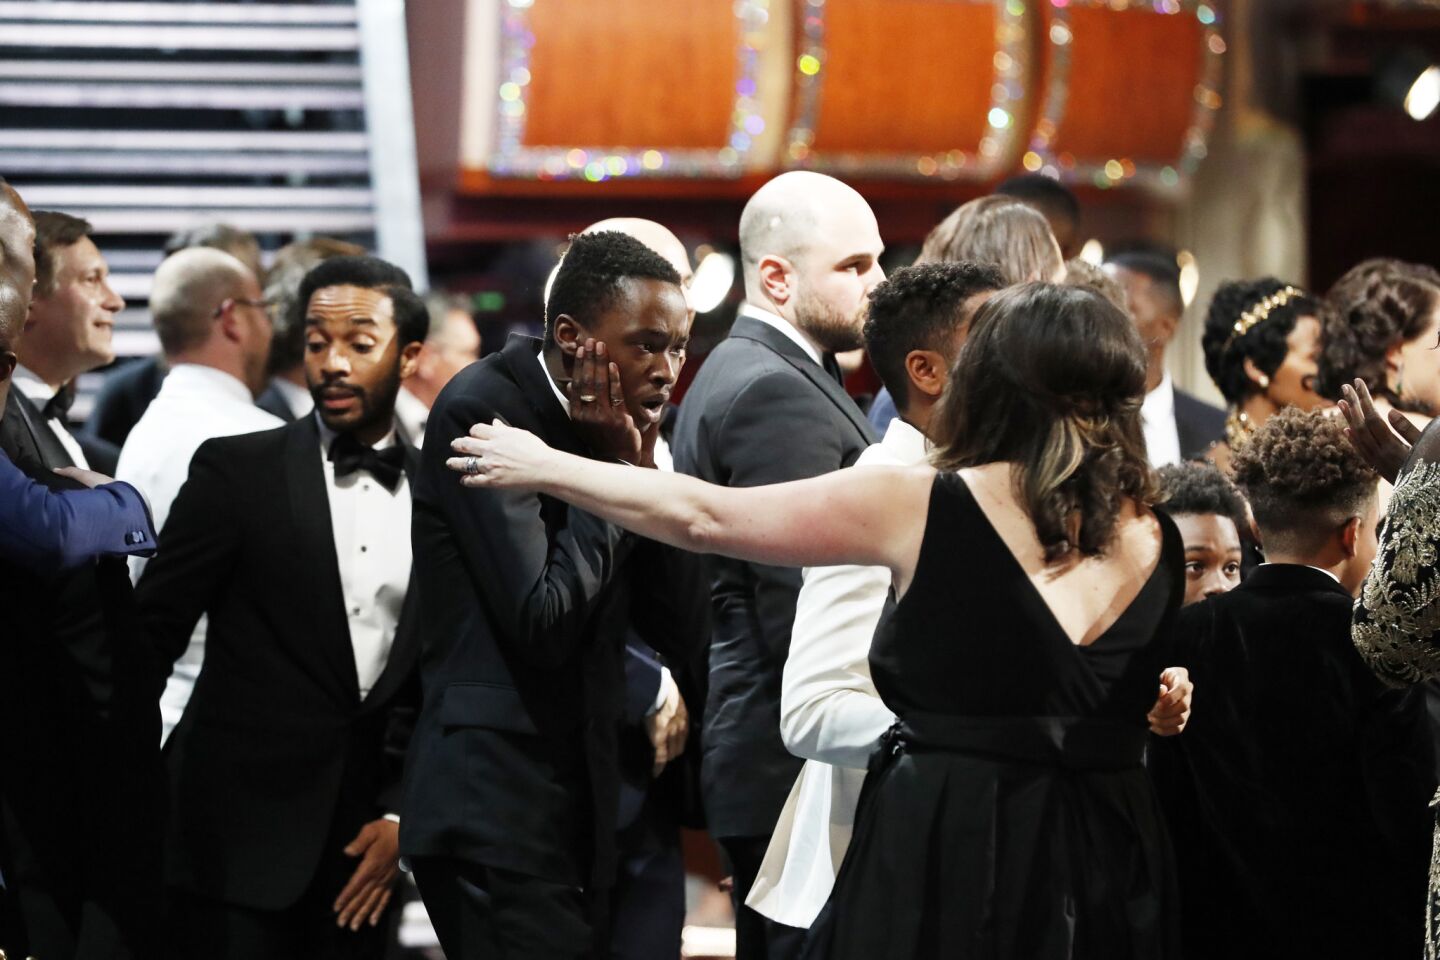 "Moonlight" actor Ashton Sanders is stunned after the movie won for best picture during the Academy Awards telecast on Feb. 26.